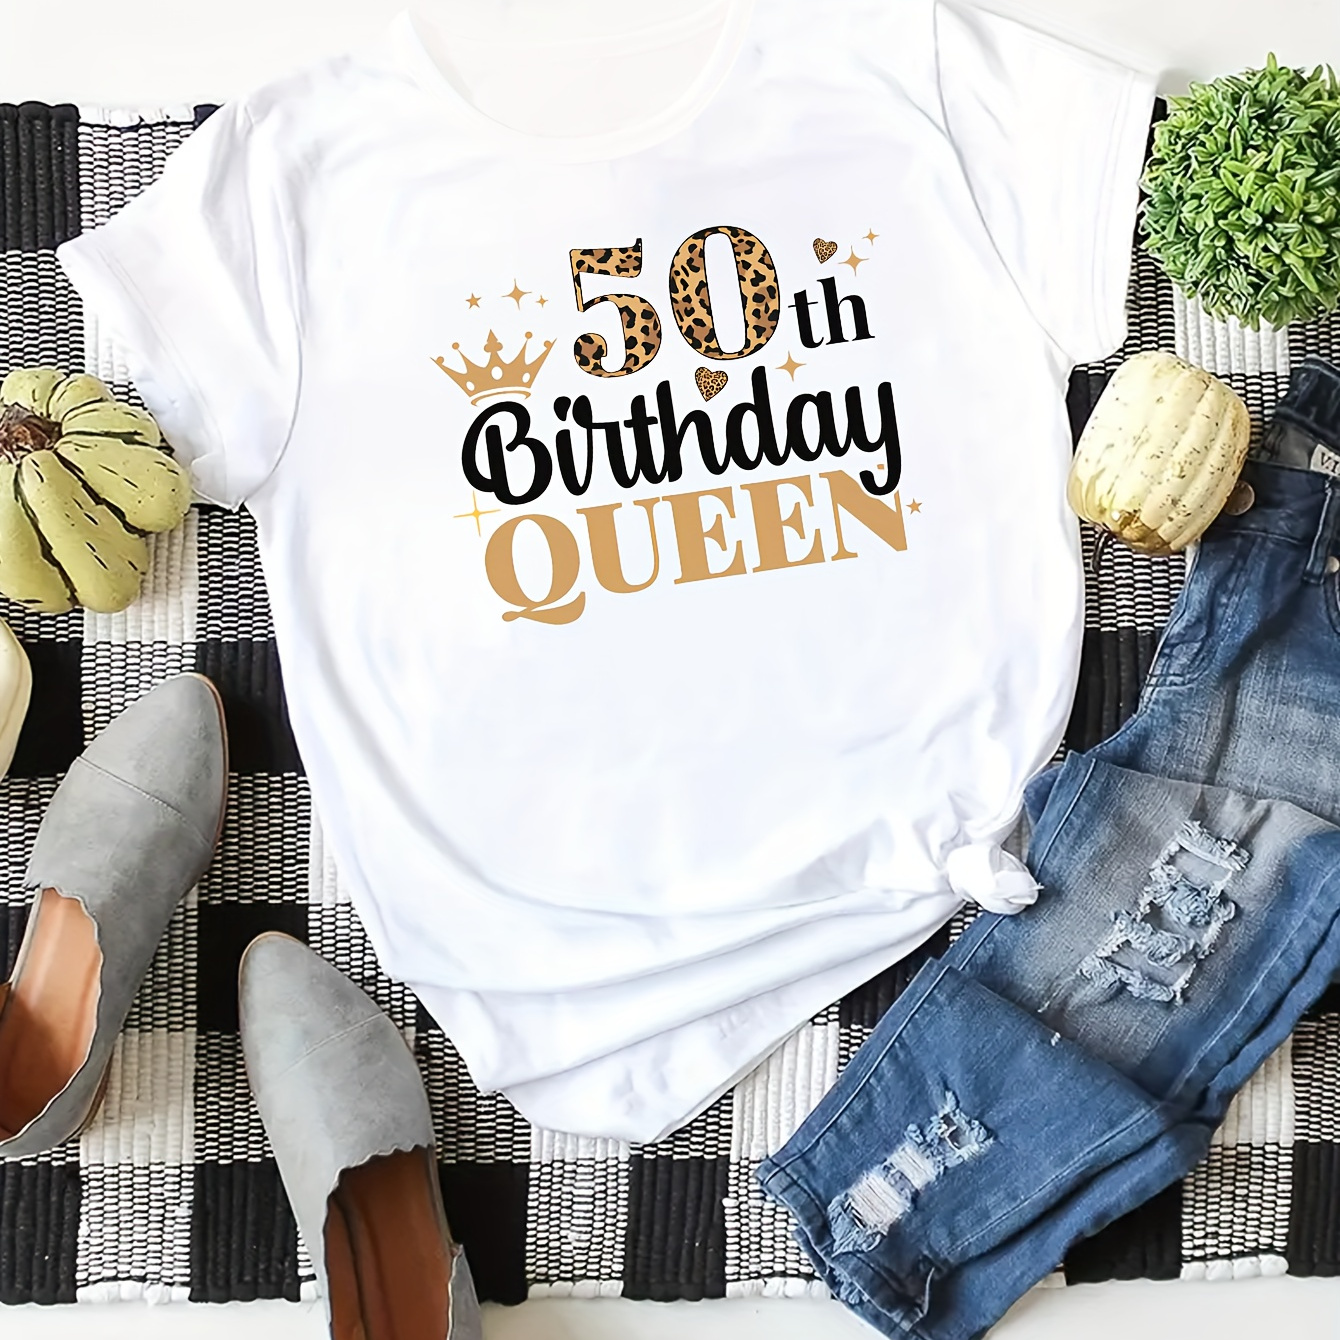 

Women's Casual Loose Fit Round Neck T-shirt, 50th Birthday Queen Celebration Graphic, Comfortable Wear